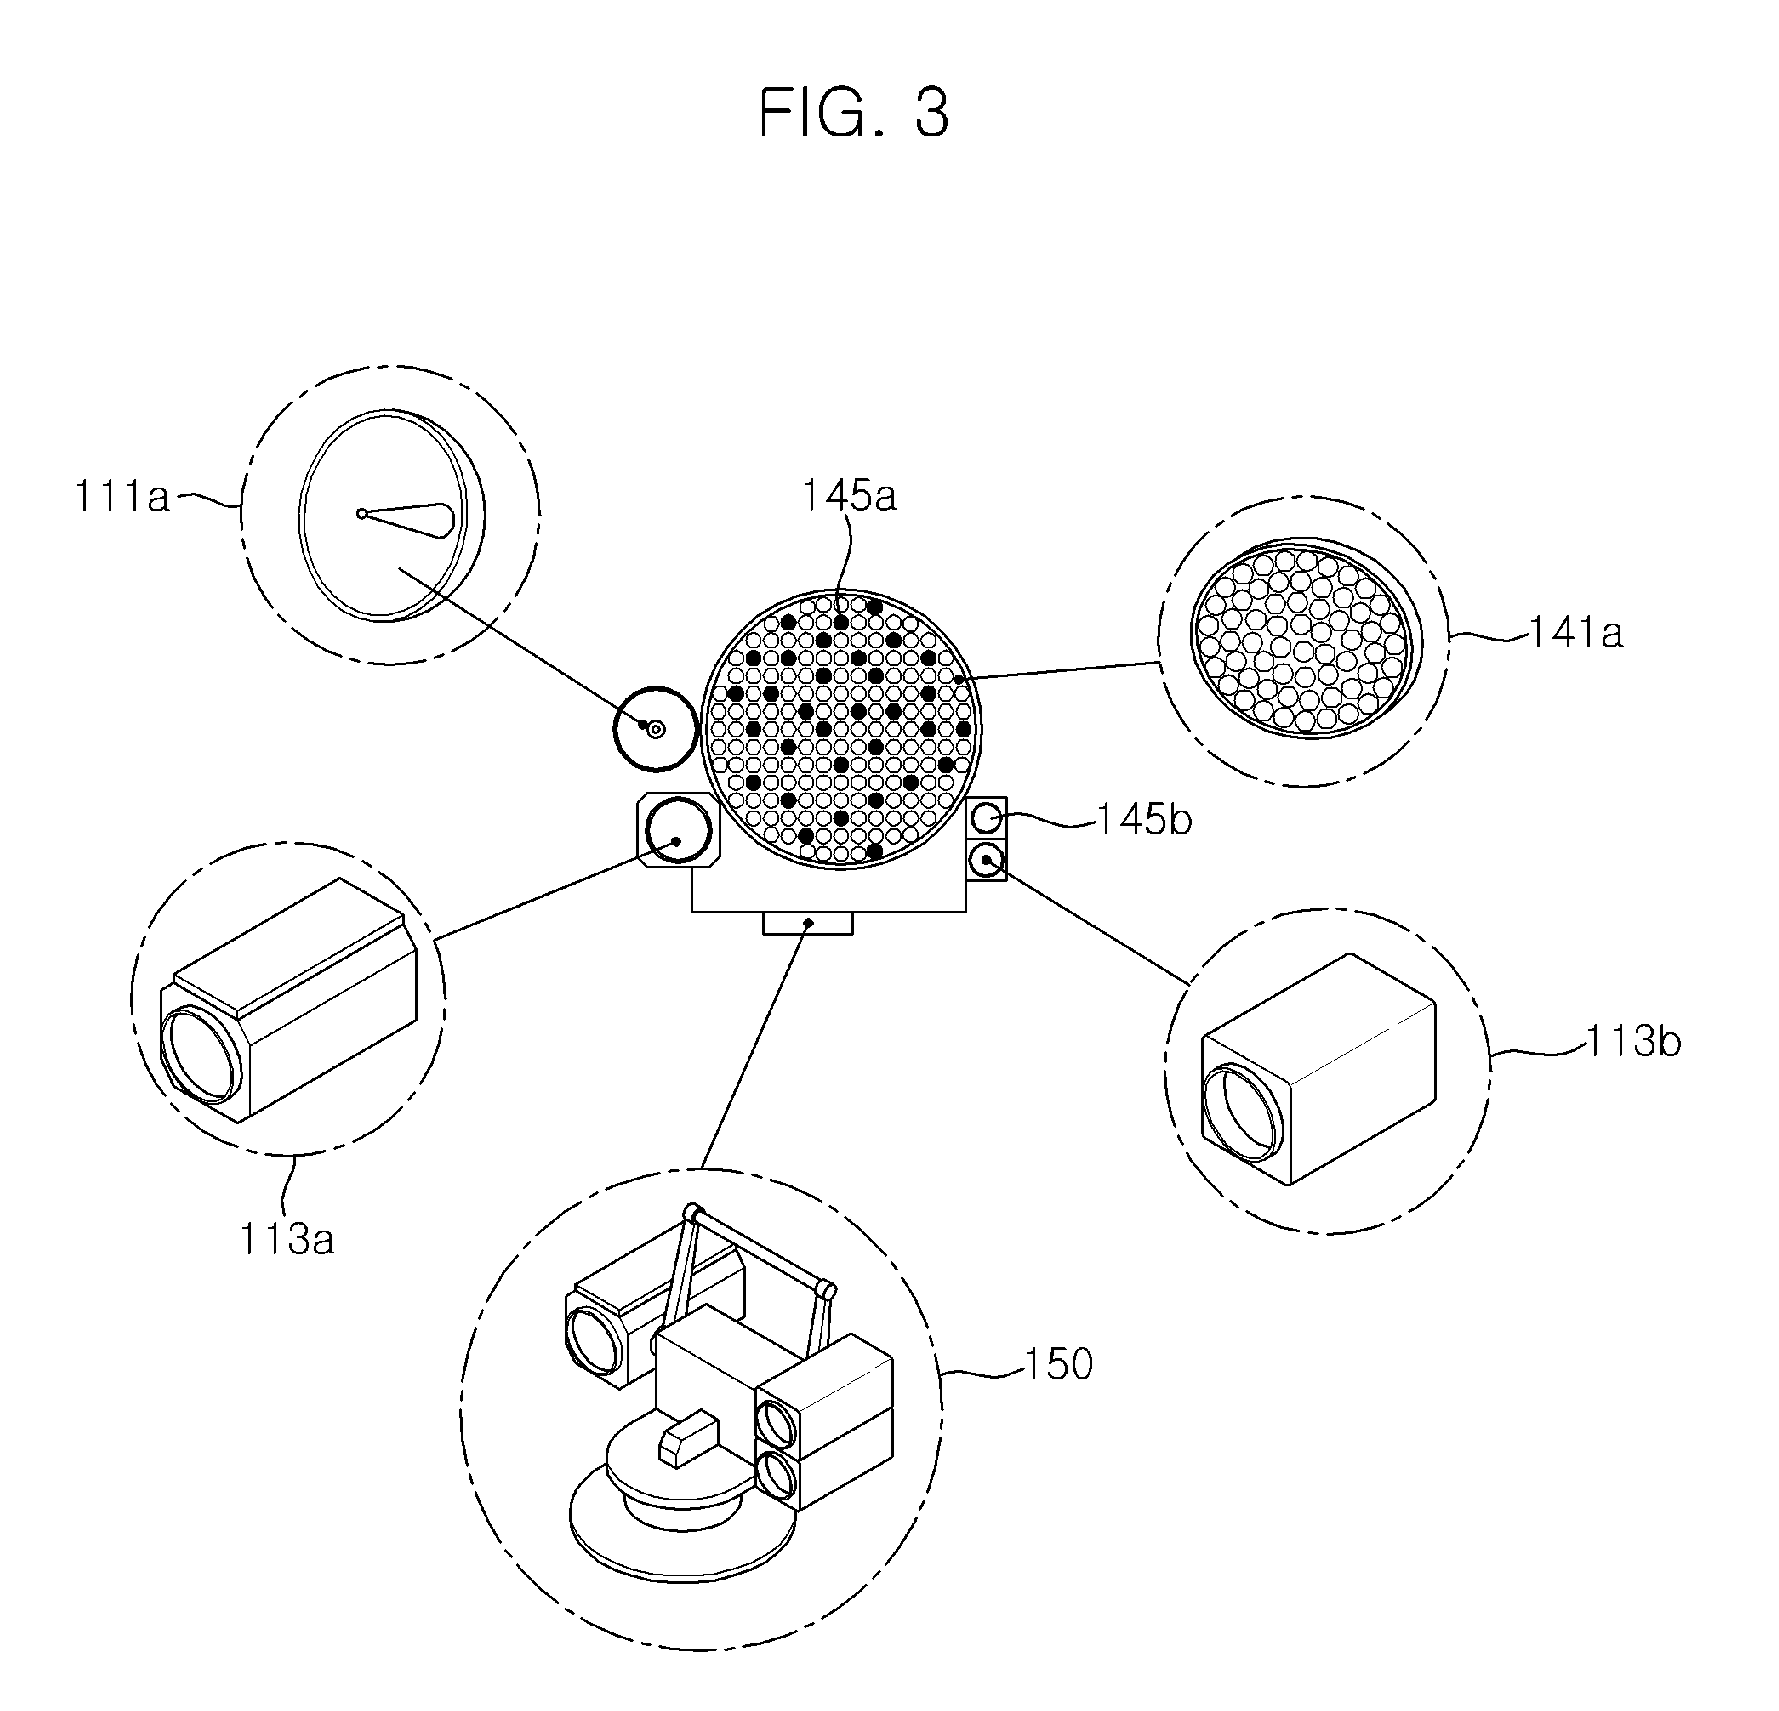 Method and apparatus for birds control using mobile robot